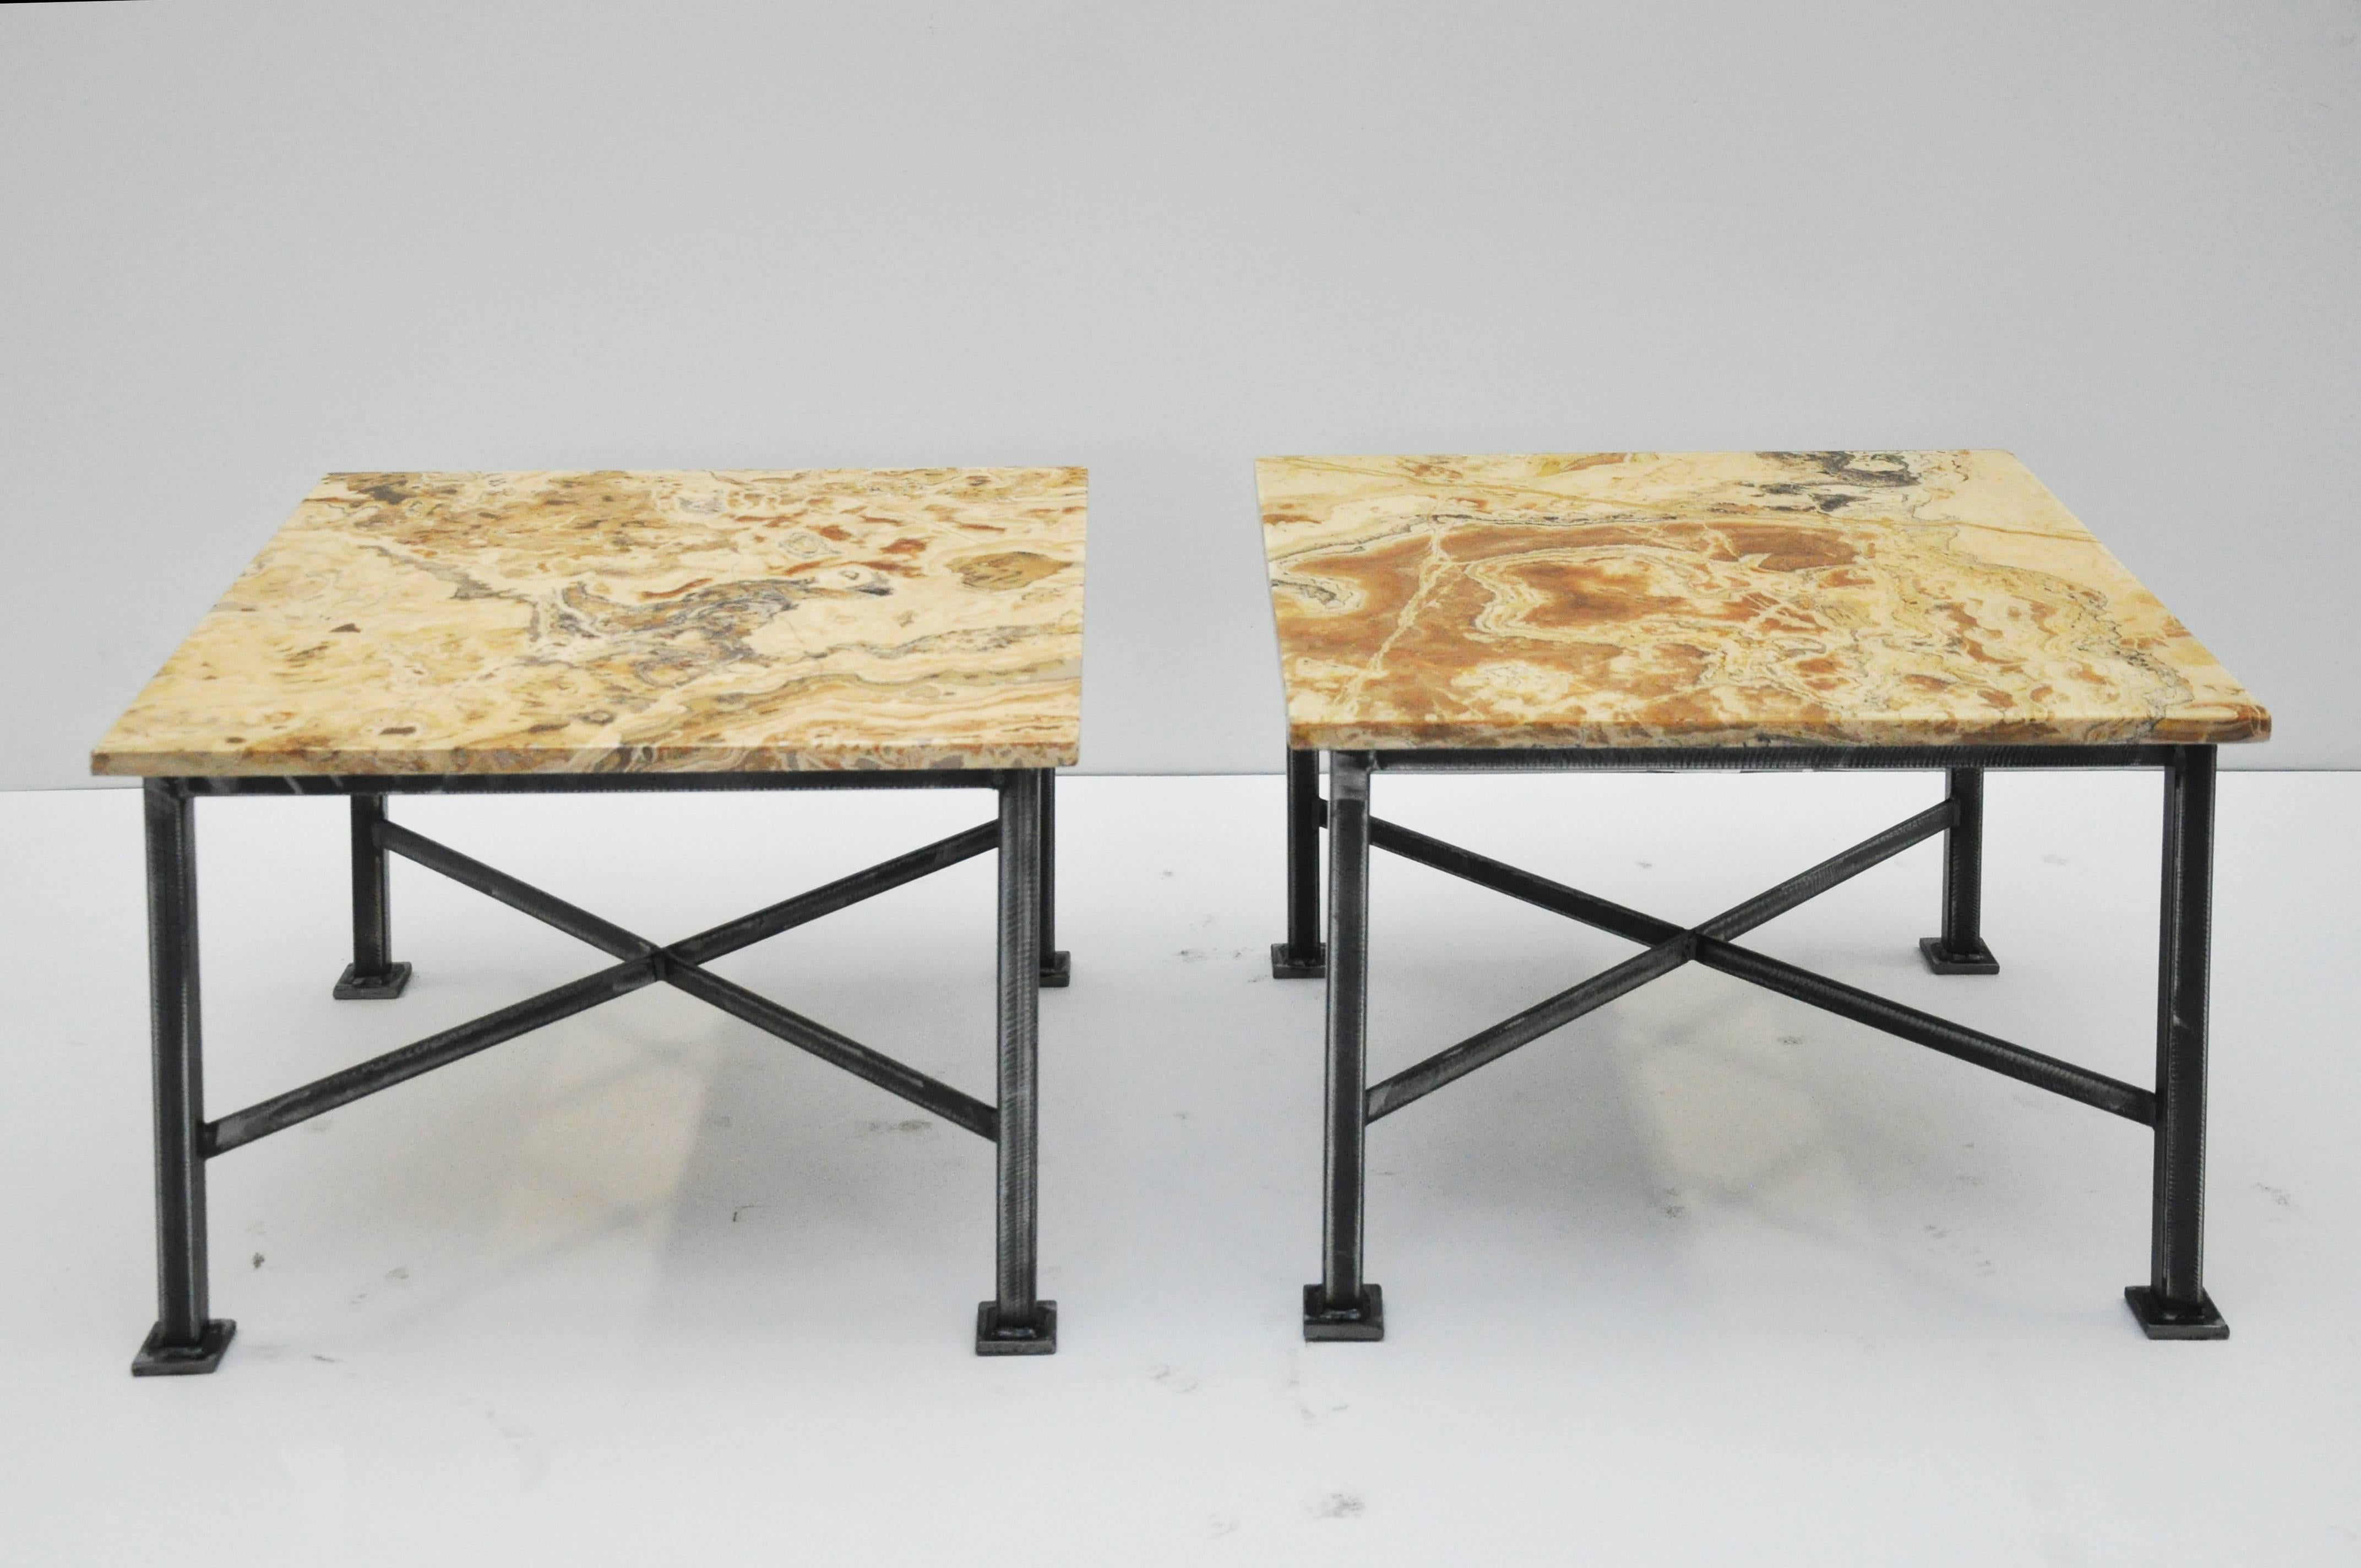 These are vintage slabs of marble that were mounted on custom iron bases. The marble has a beautiful stunning coloration. There are no marking as to where the marble originated.